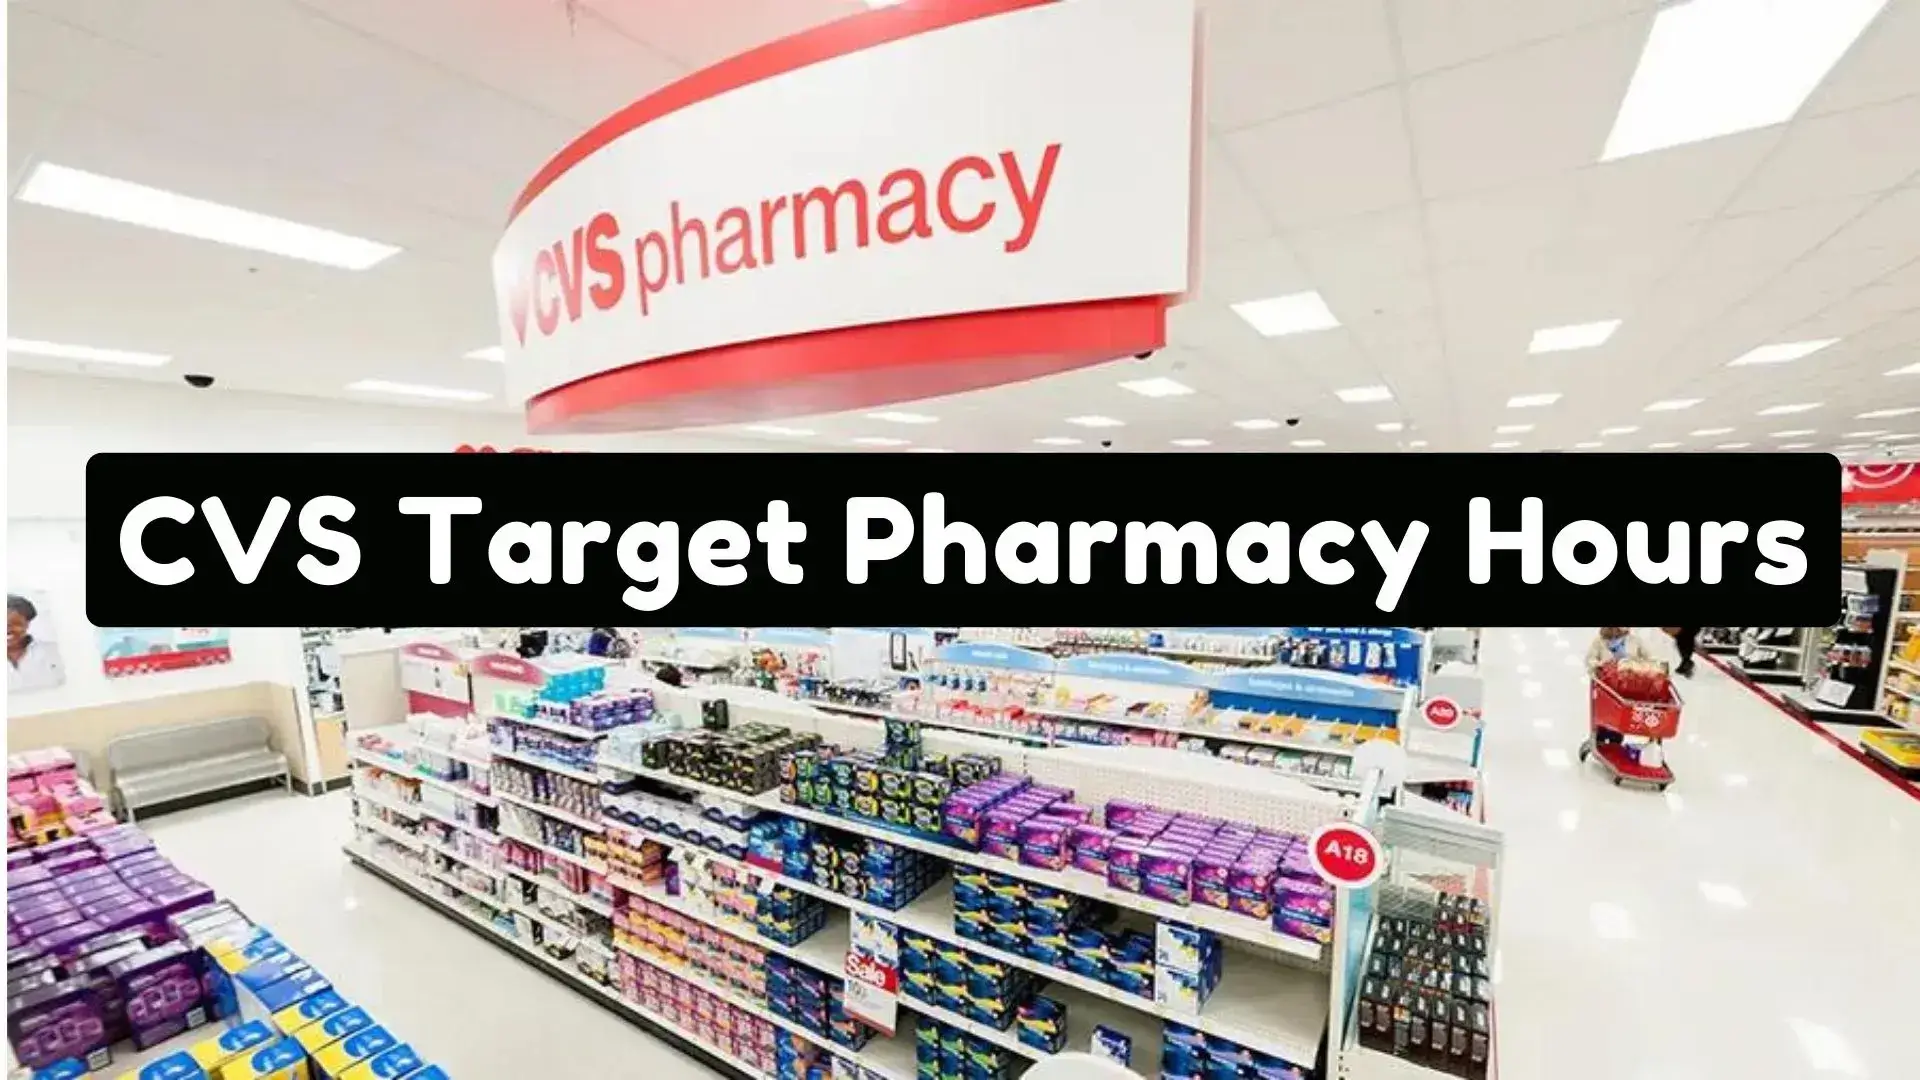 Target Pharmacy Hours | 24/7 Access to Reliable Medications